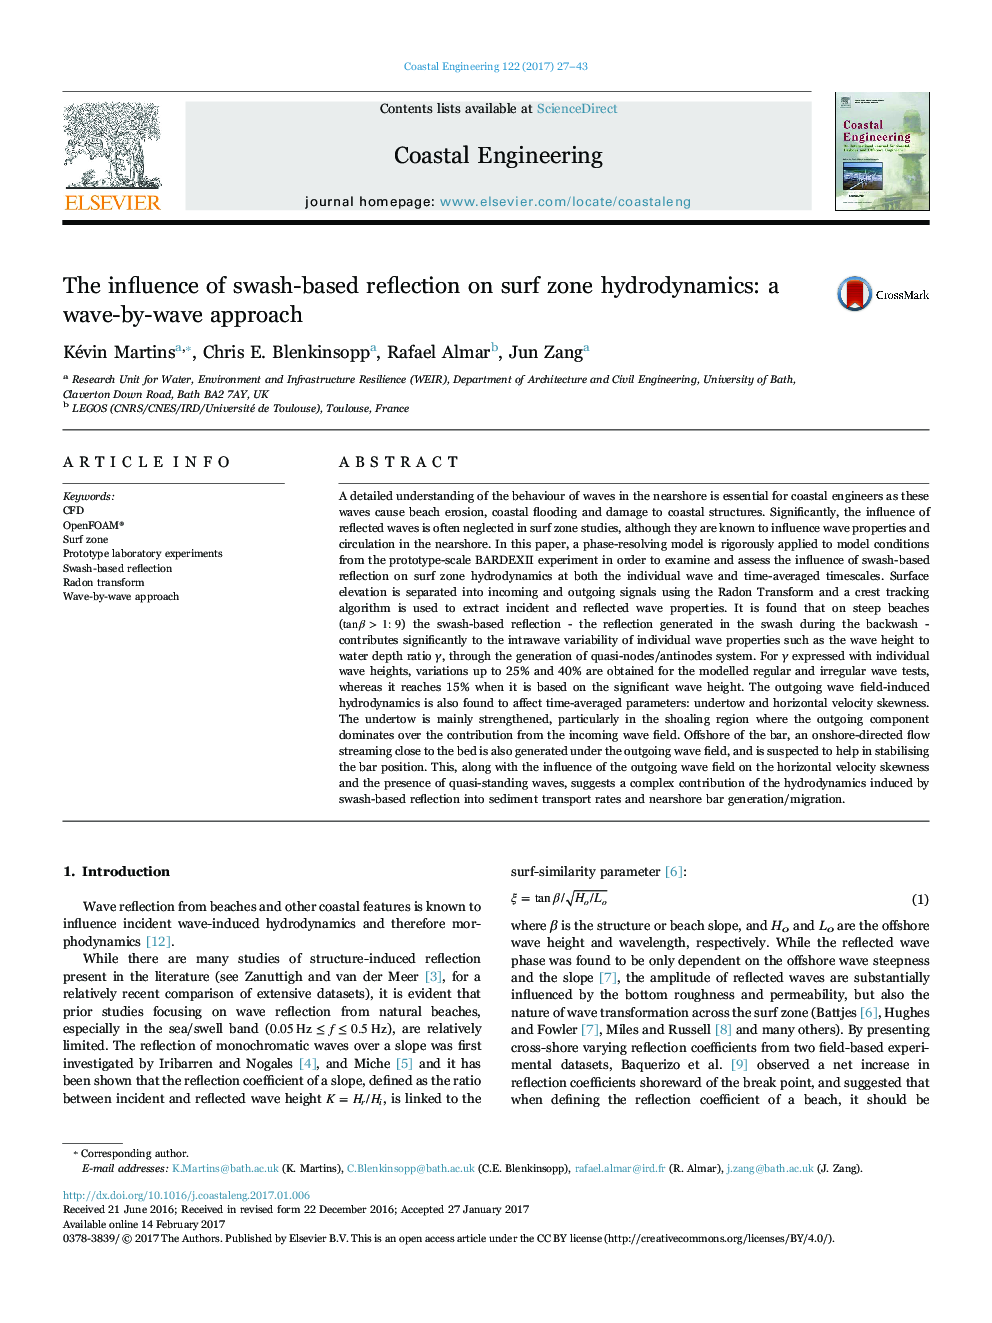 The influence of swash-based reflection on surf zone hydrodynamics: a wave-by-wave approach